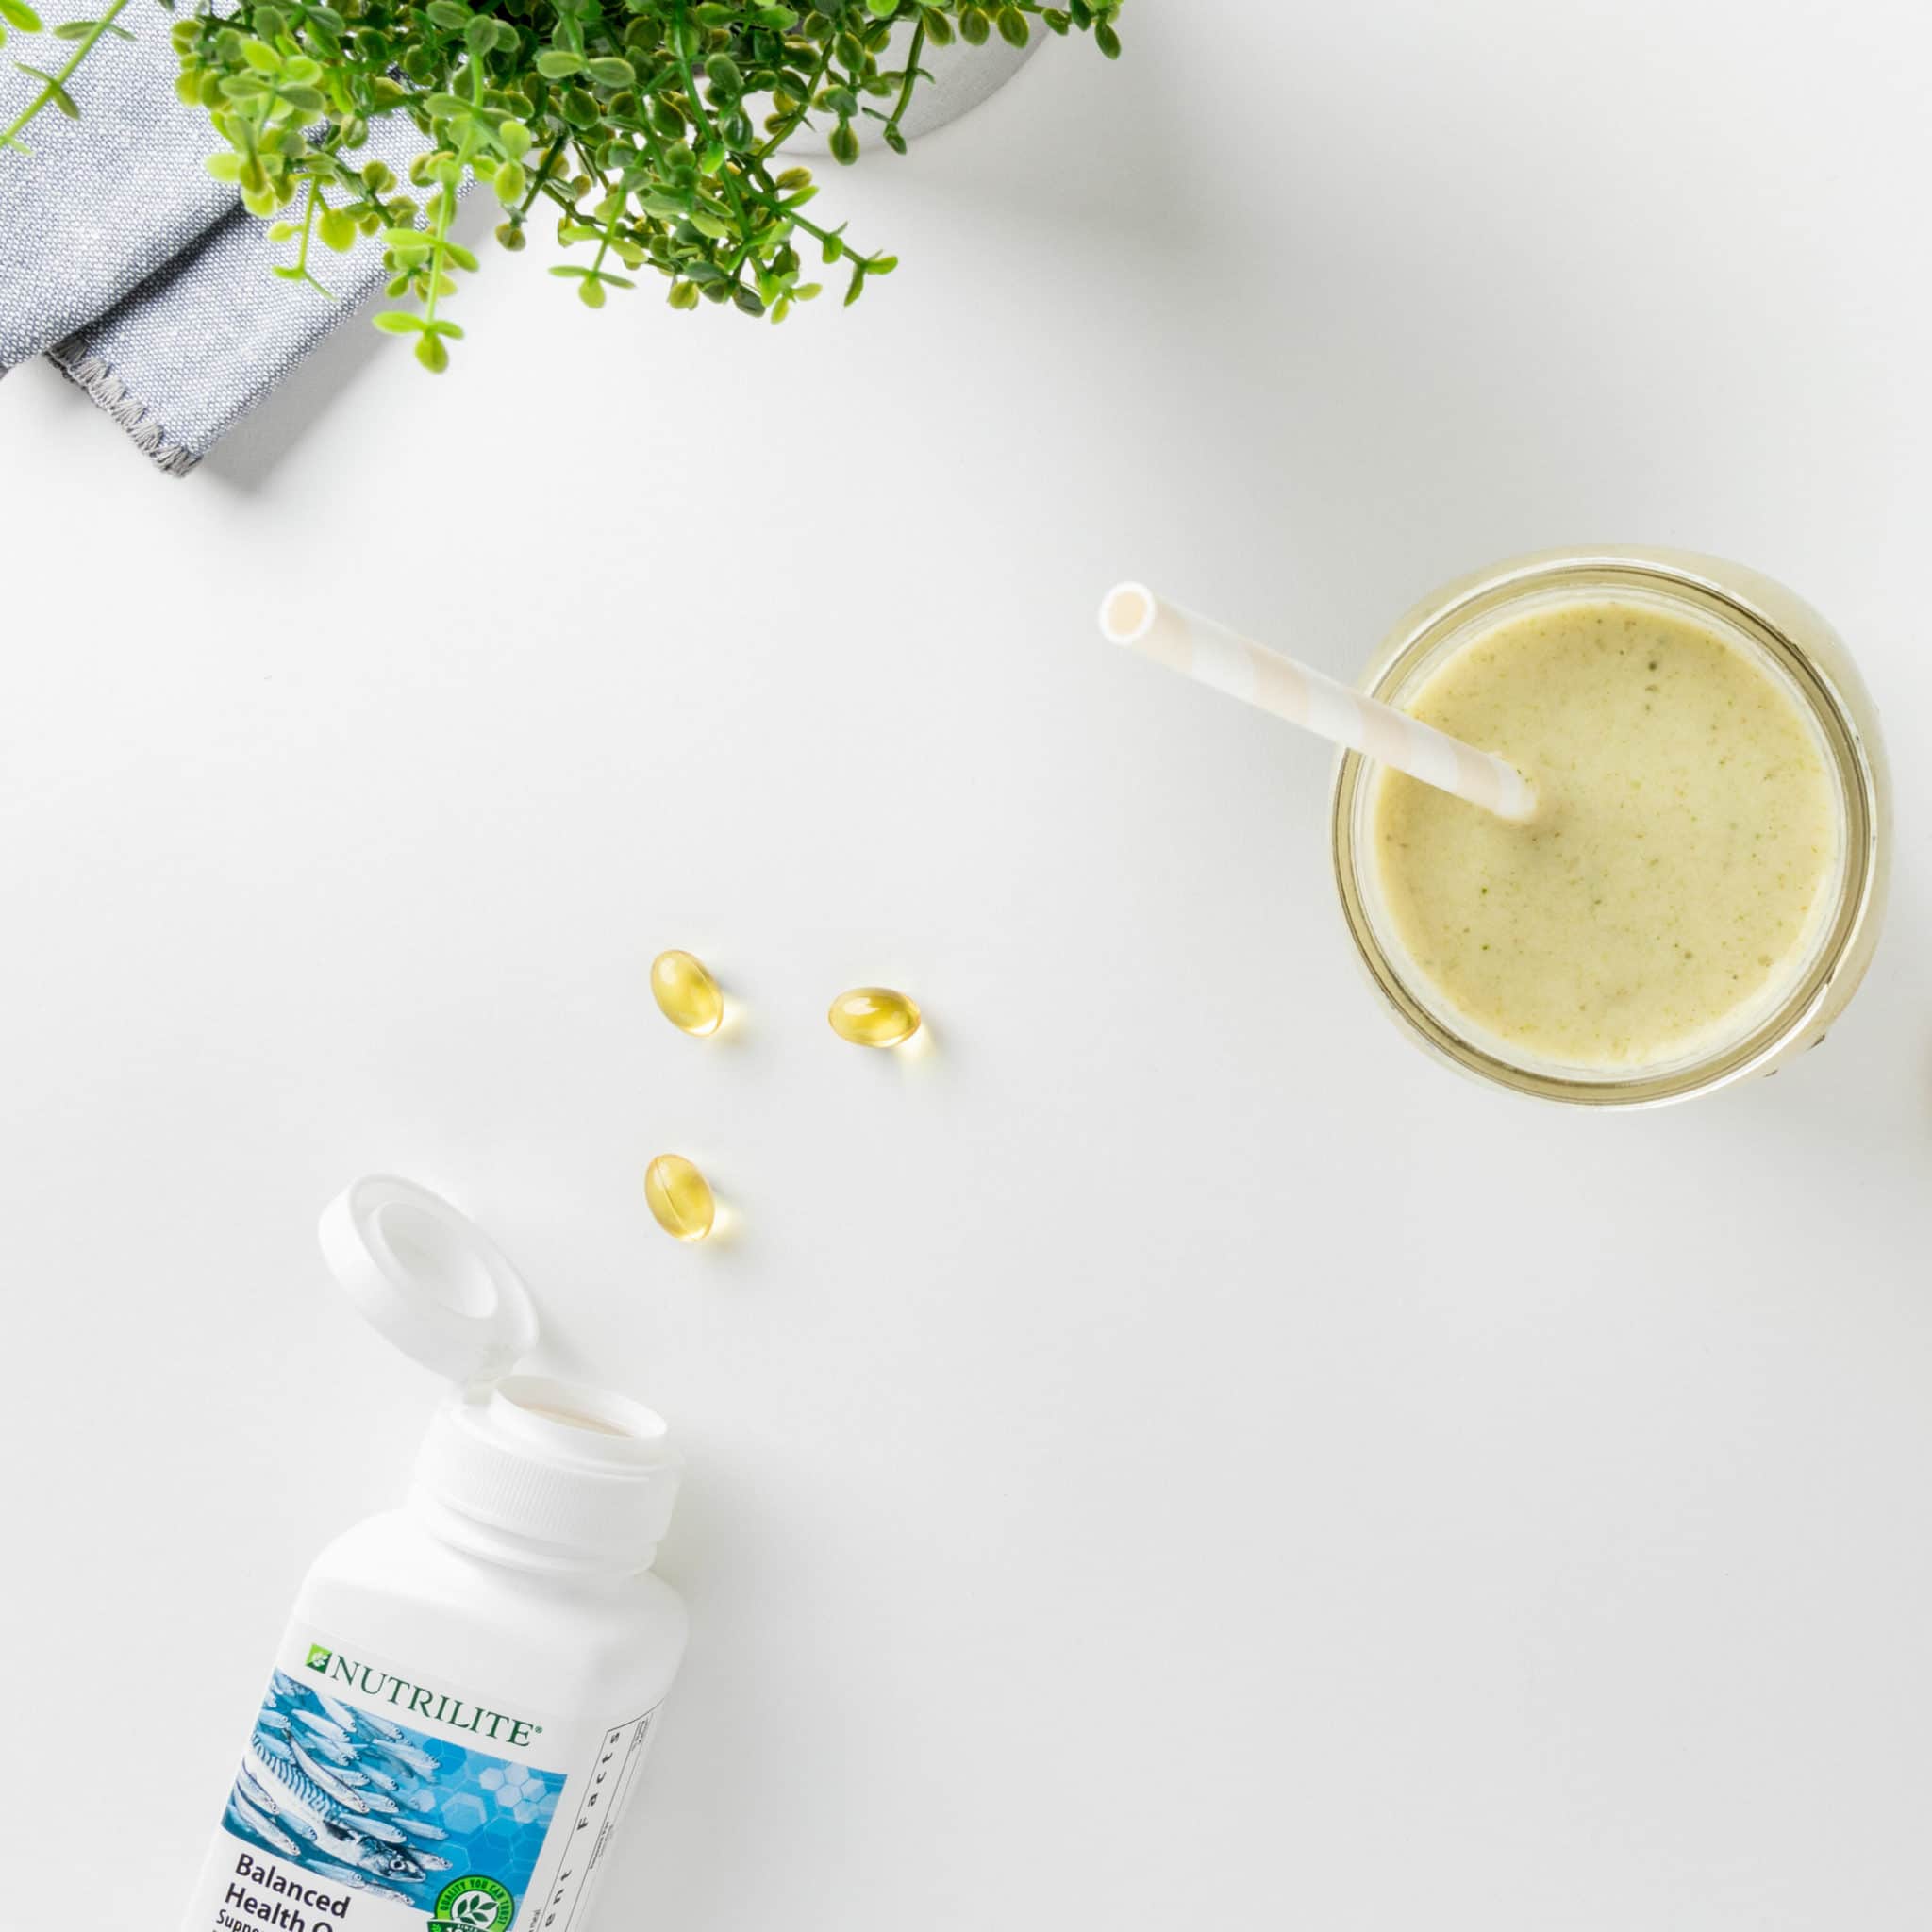 A close up image of an open bottle of Balanced Health Omega gel caps next to a smoothie in a glass with a straw. Omega-3 fatty acids help support the health of our nervous and cardiovascular systems, while protein helps us grow and repair our cells.